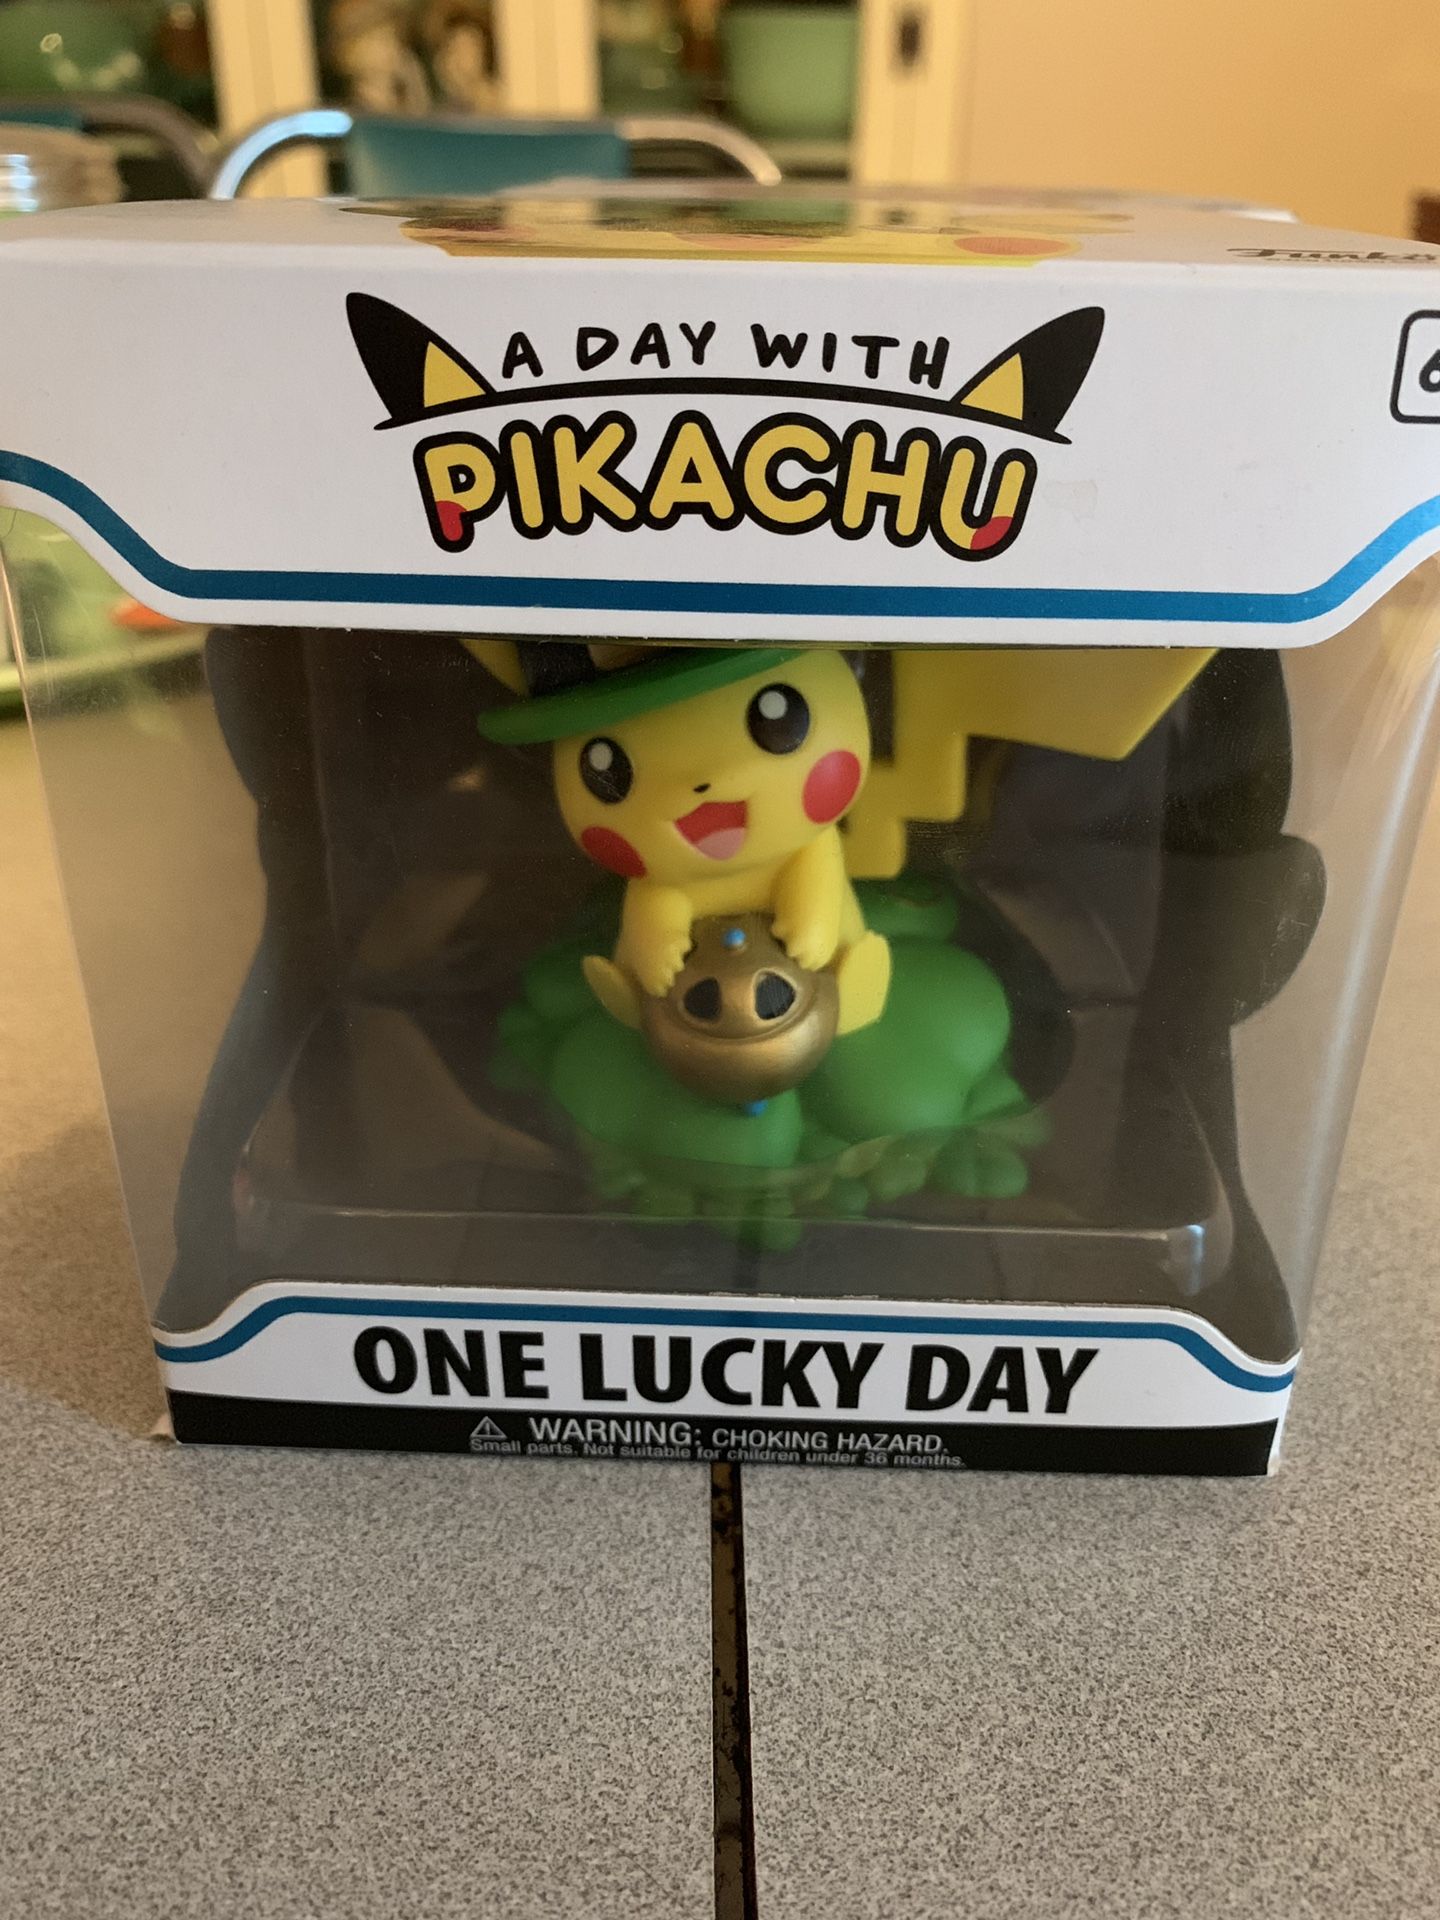 a day with pikachu ONE LUCKY DAY. pokemon center exclusive